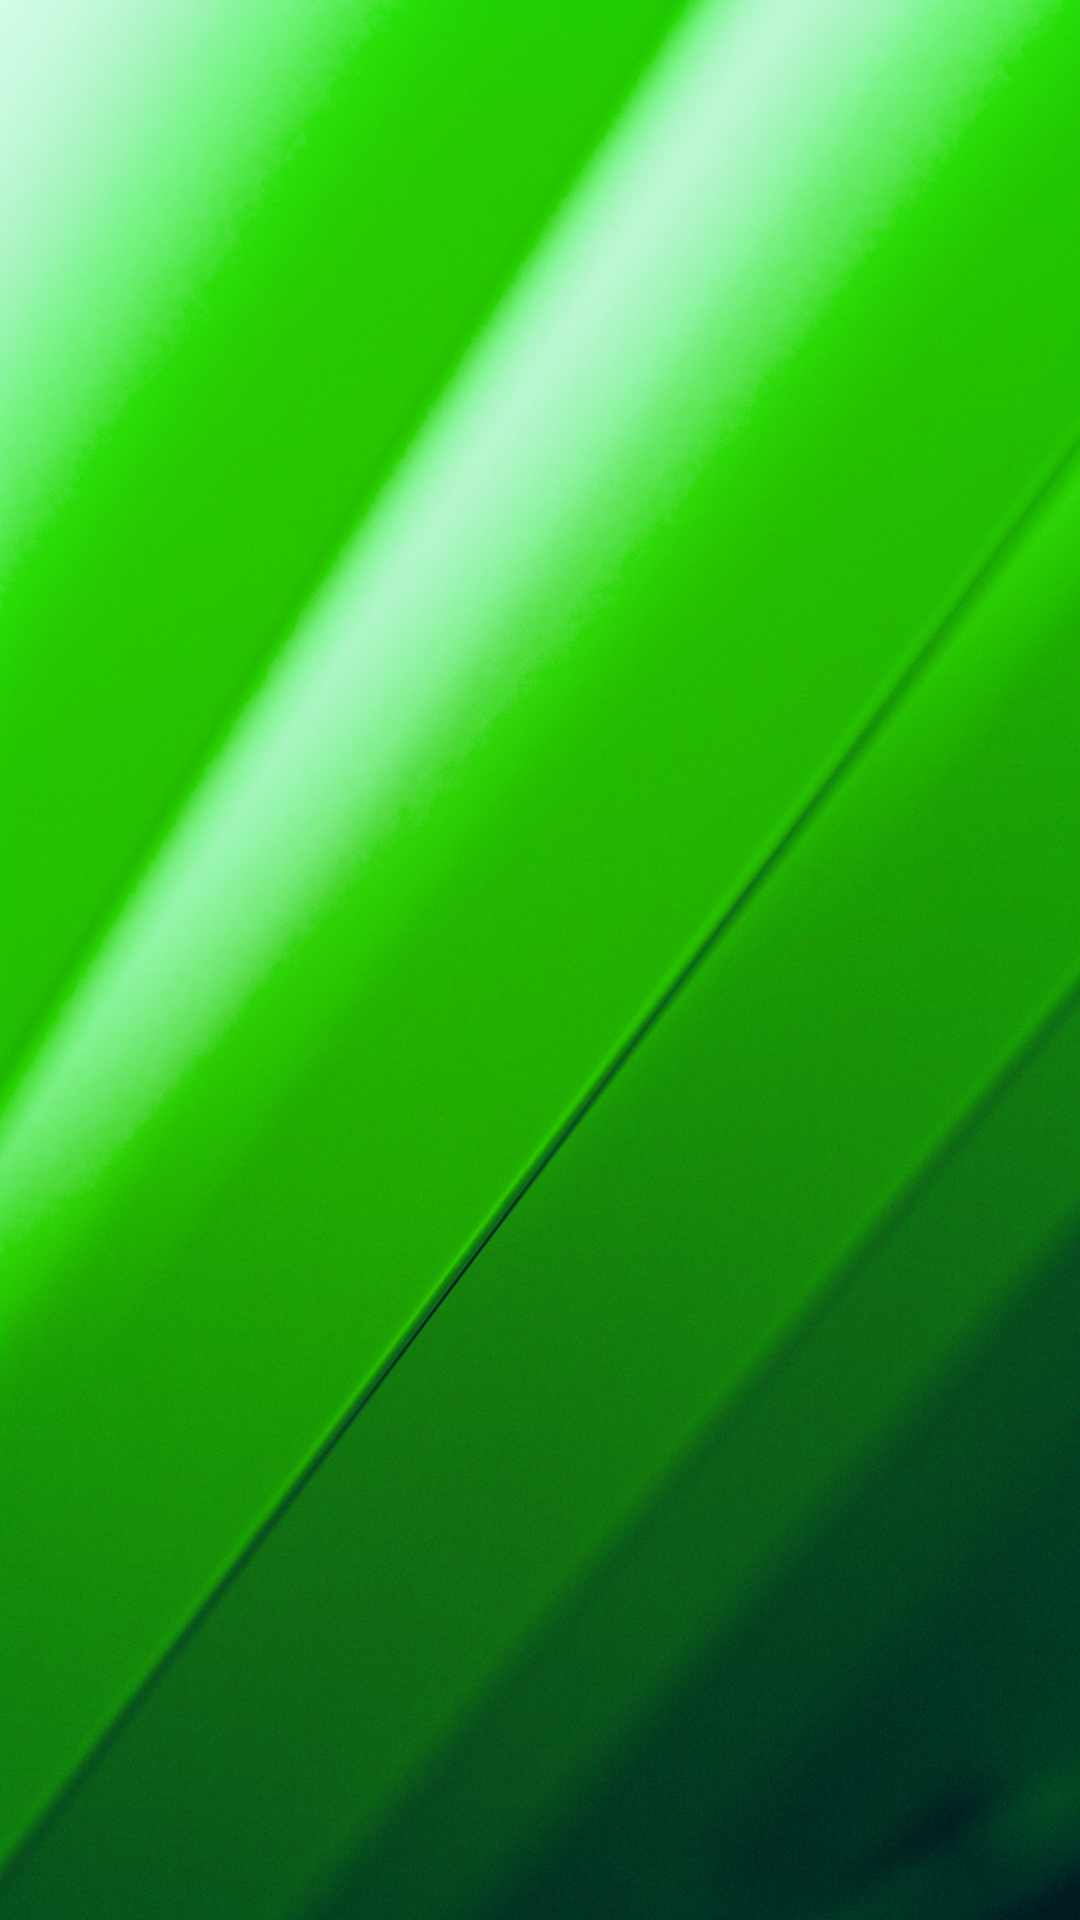 Wallpaper A Simple Green Android